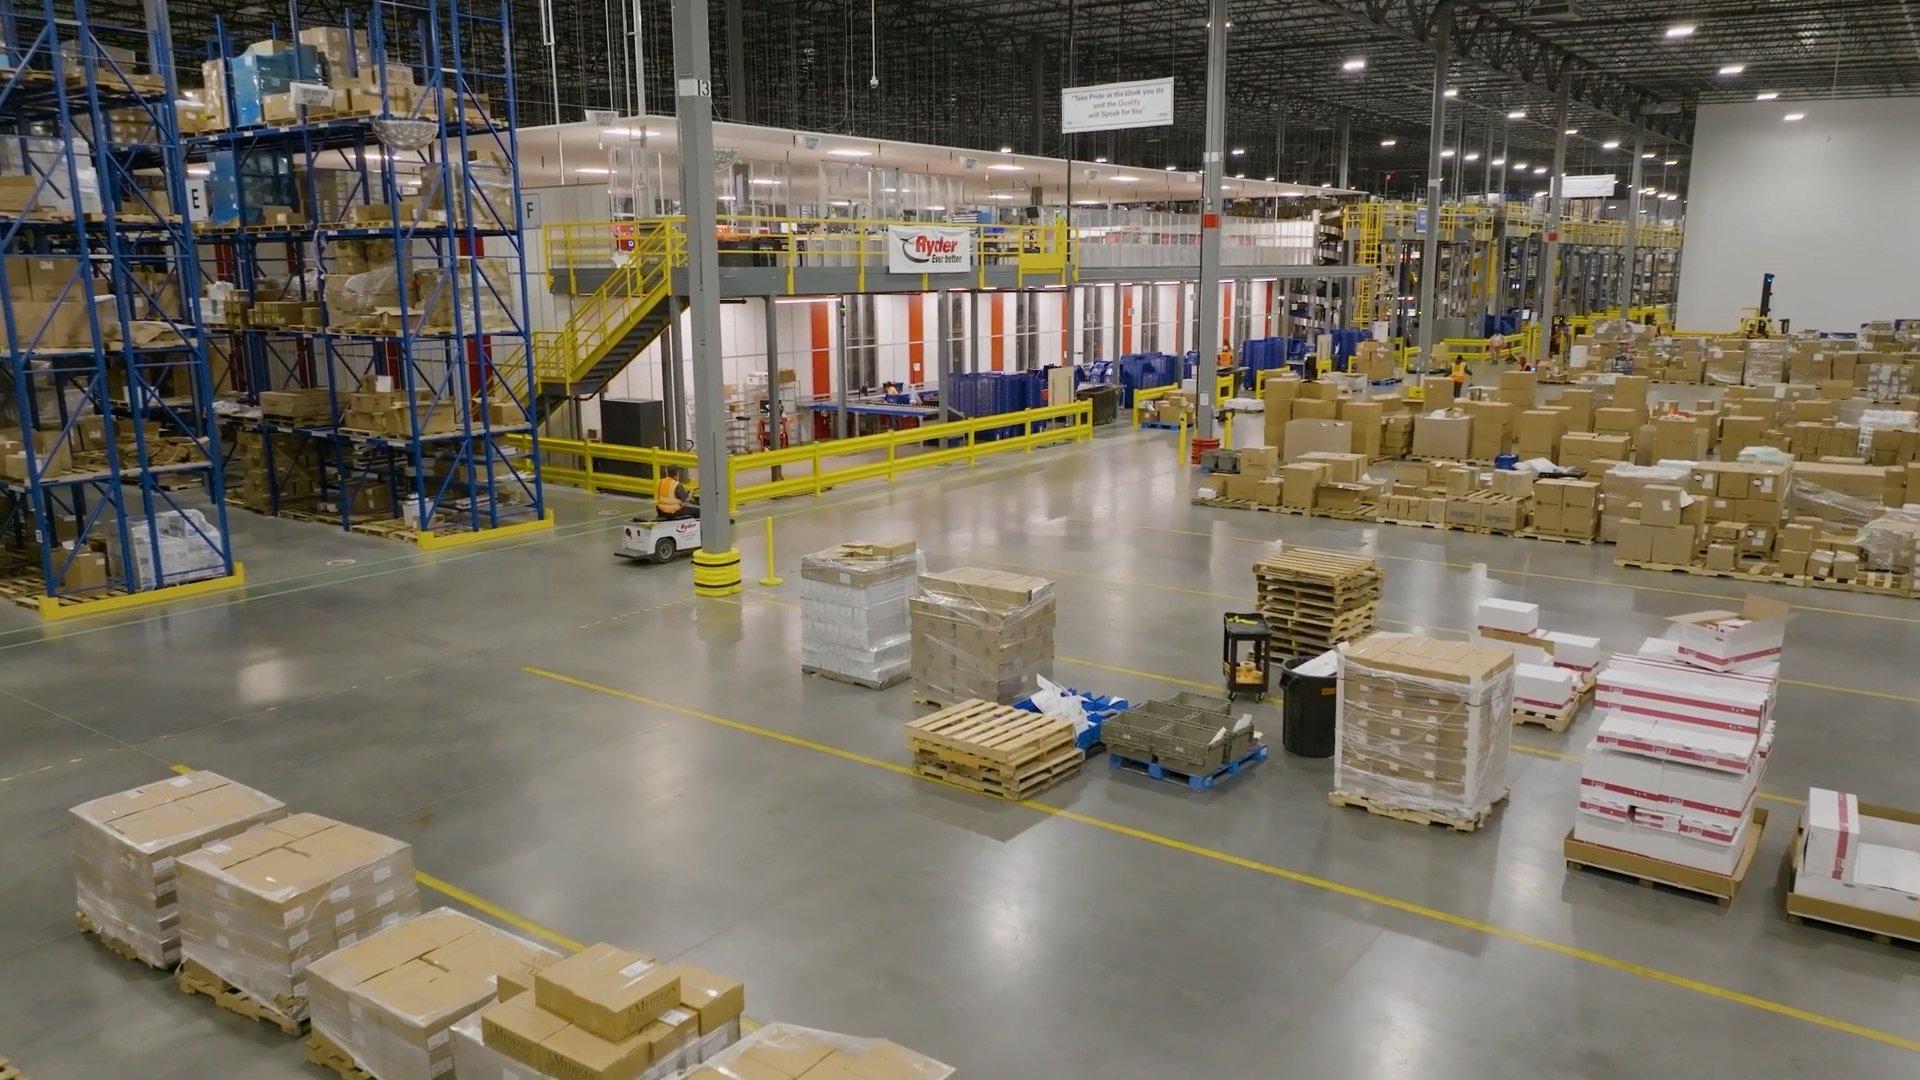 Ryder recognized for engineering self-distribution supply chain model for hospital network. The highly automated distribution center provides 100% inventory control, real-time end-to-end visibility, improved fill rates, on-time delivery, and maximized efficiency throughout the operation.